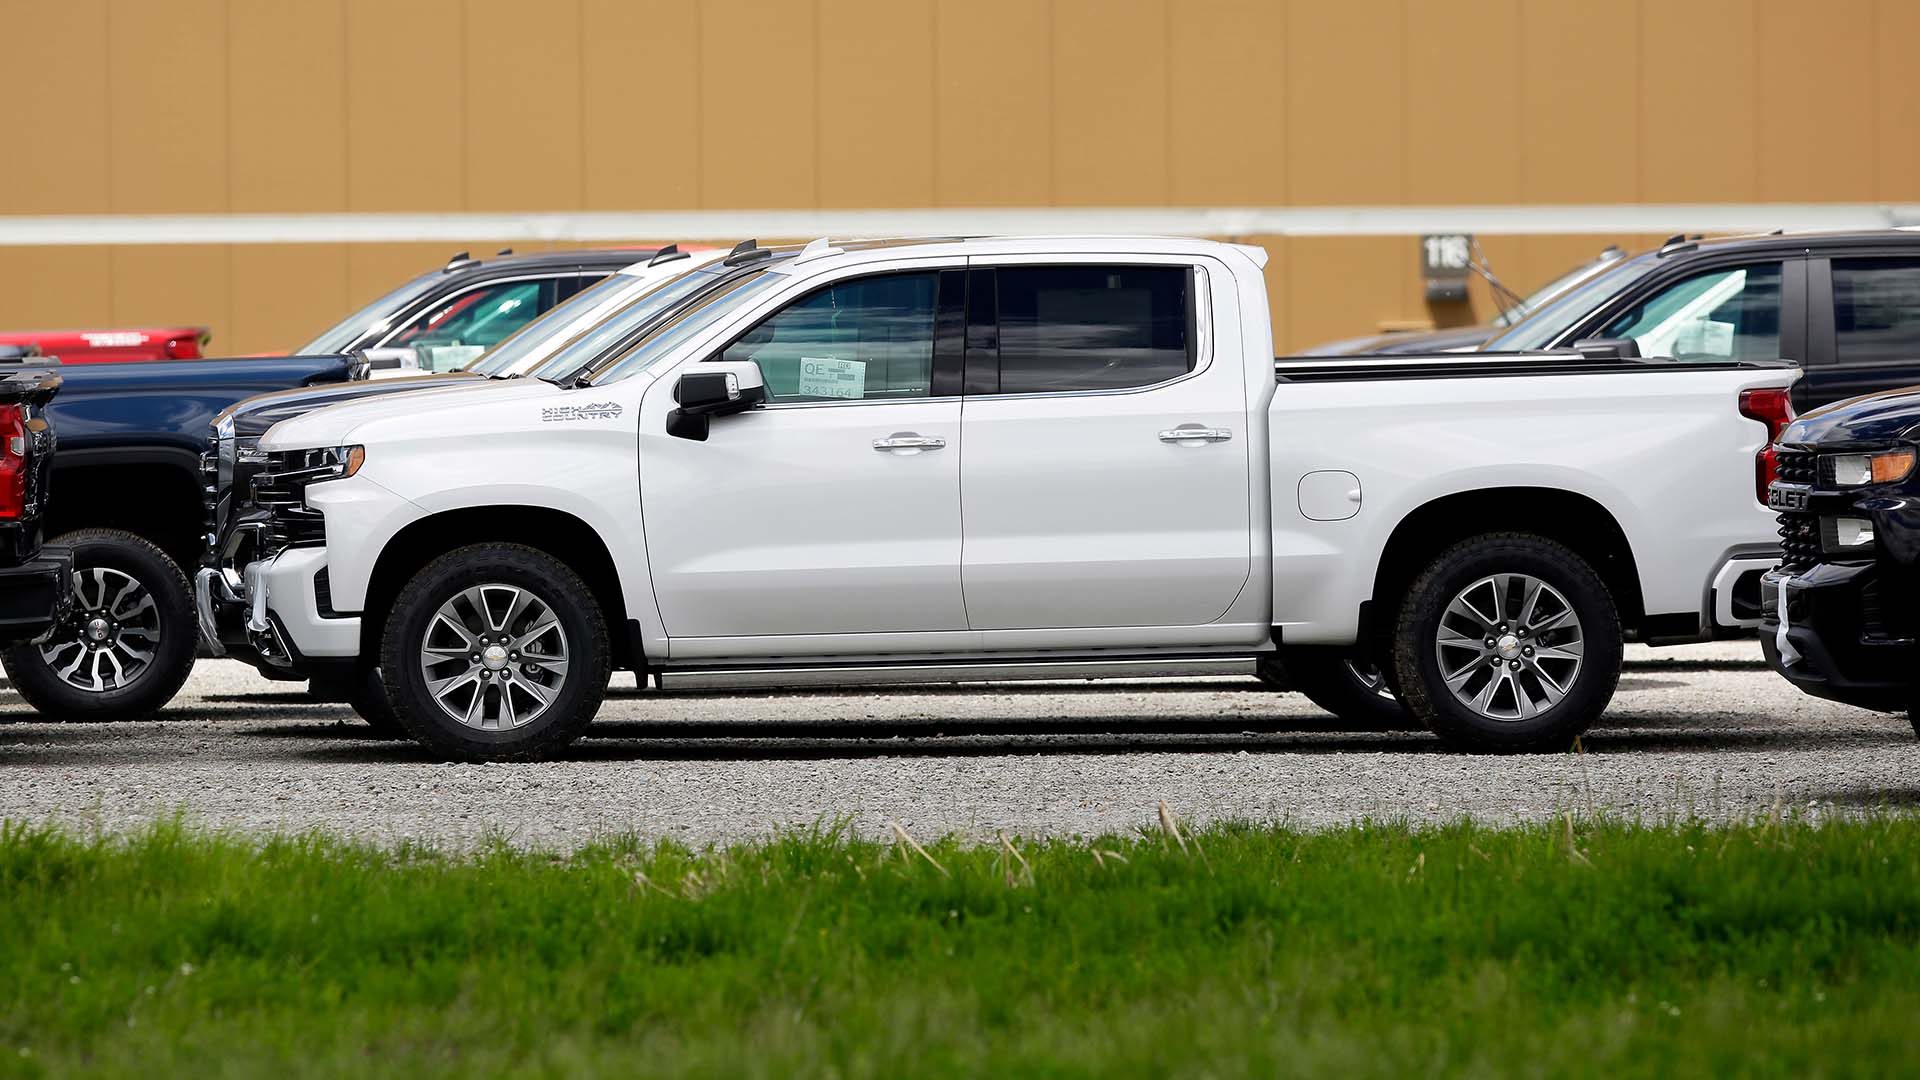 Chipless GM Trucks Have Been Stashed at a Former Chip Plant for Months